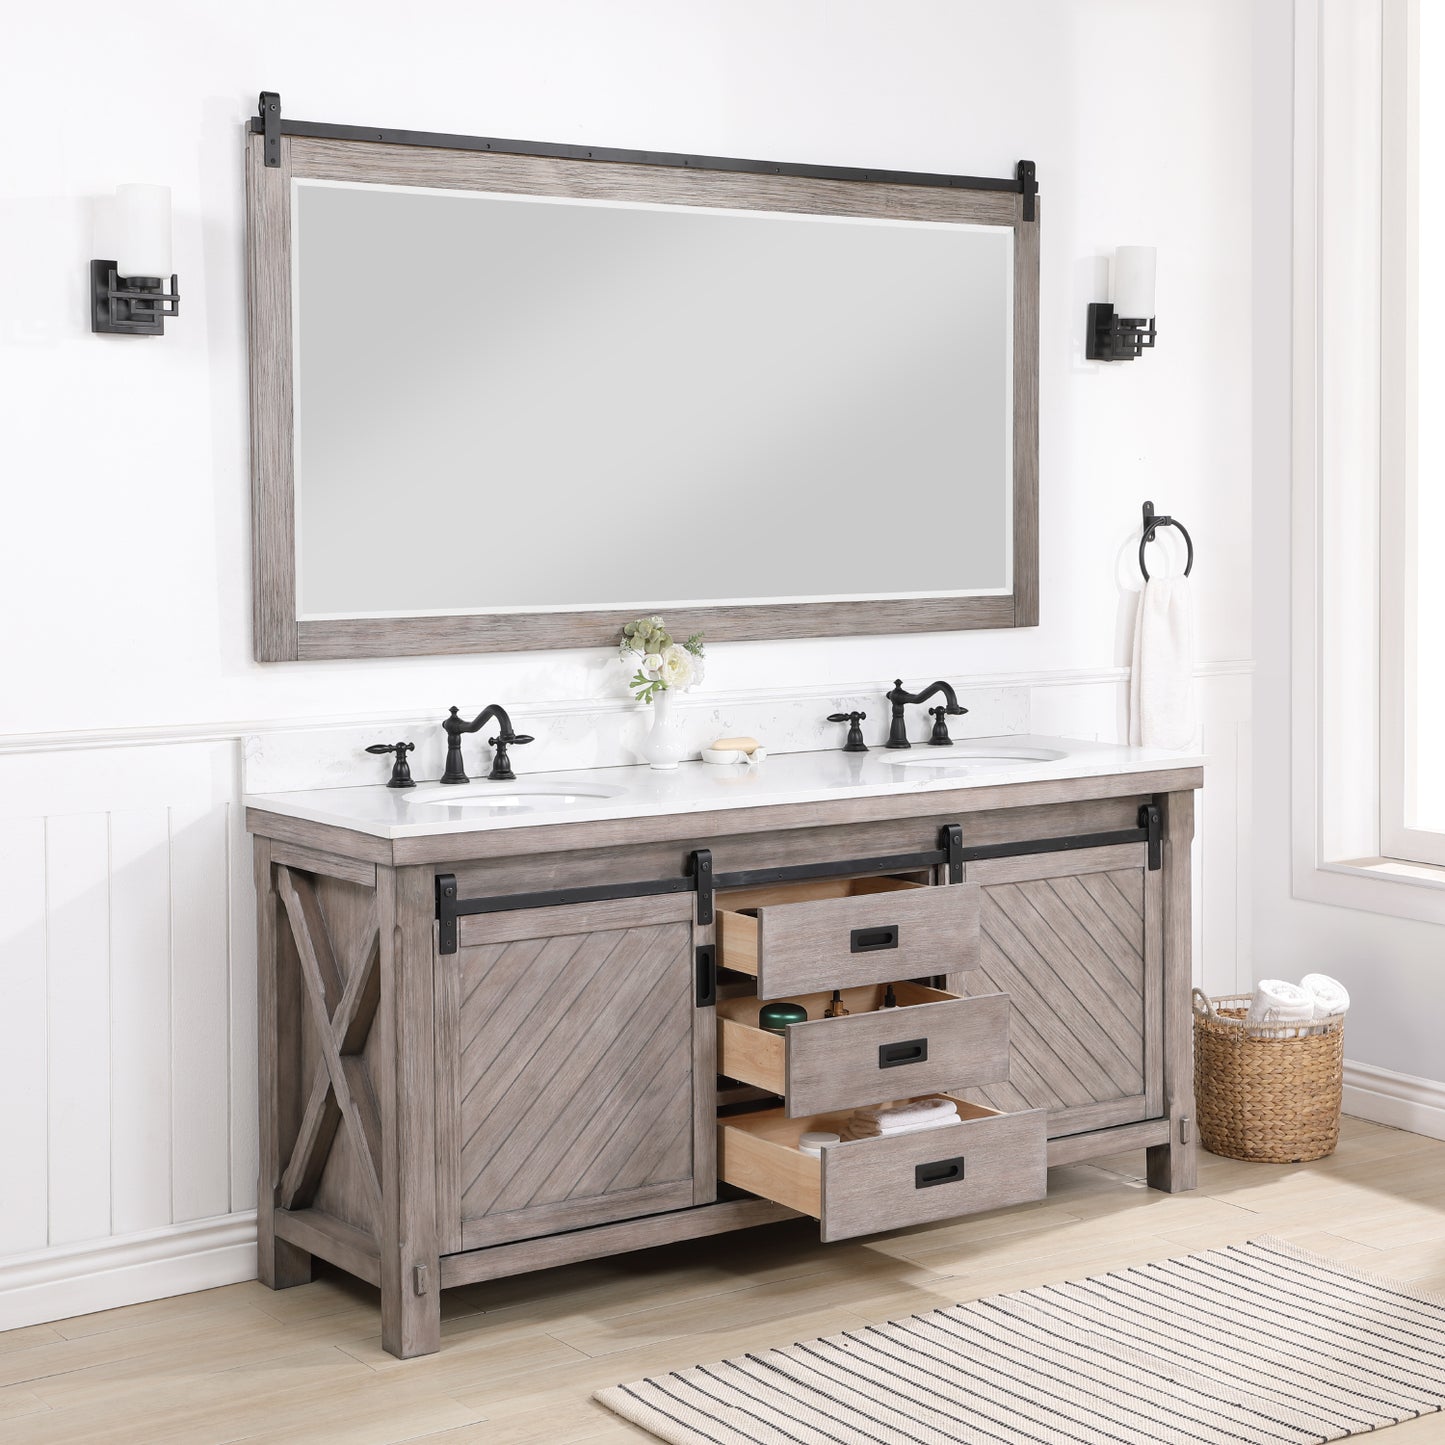 Cortes 72" Double Sink Bath Vanity in Classical Grey with White Composite Countertop and Mirror